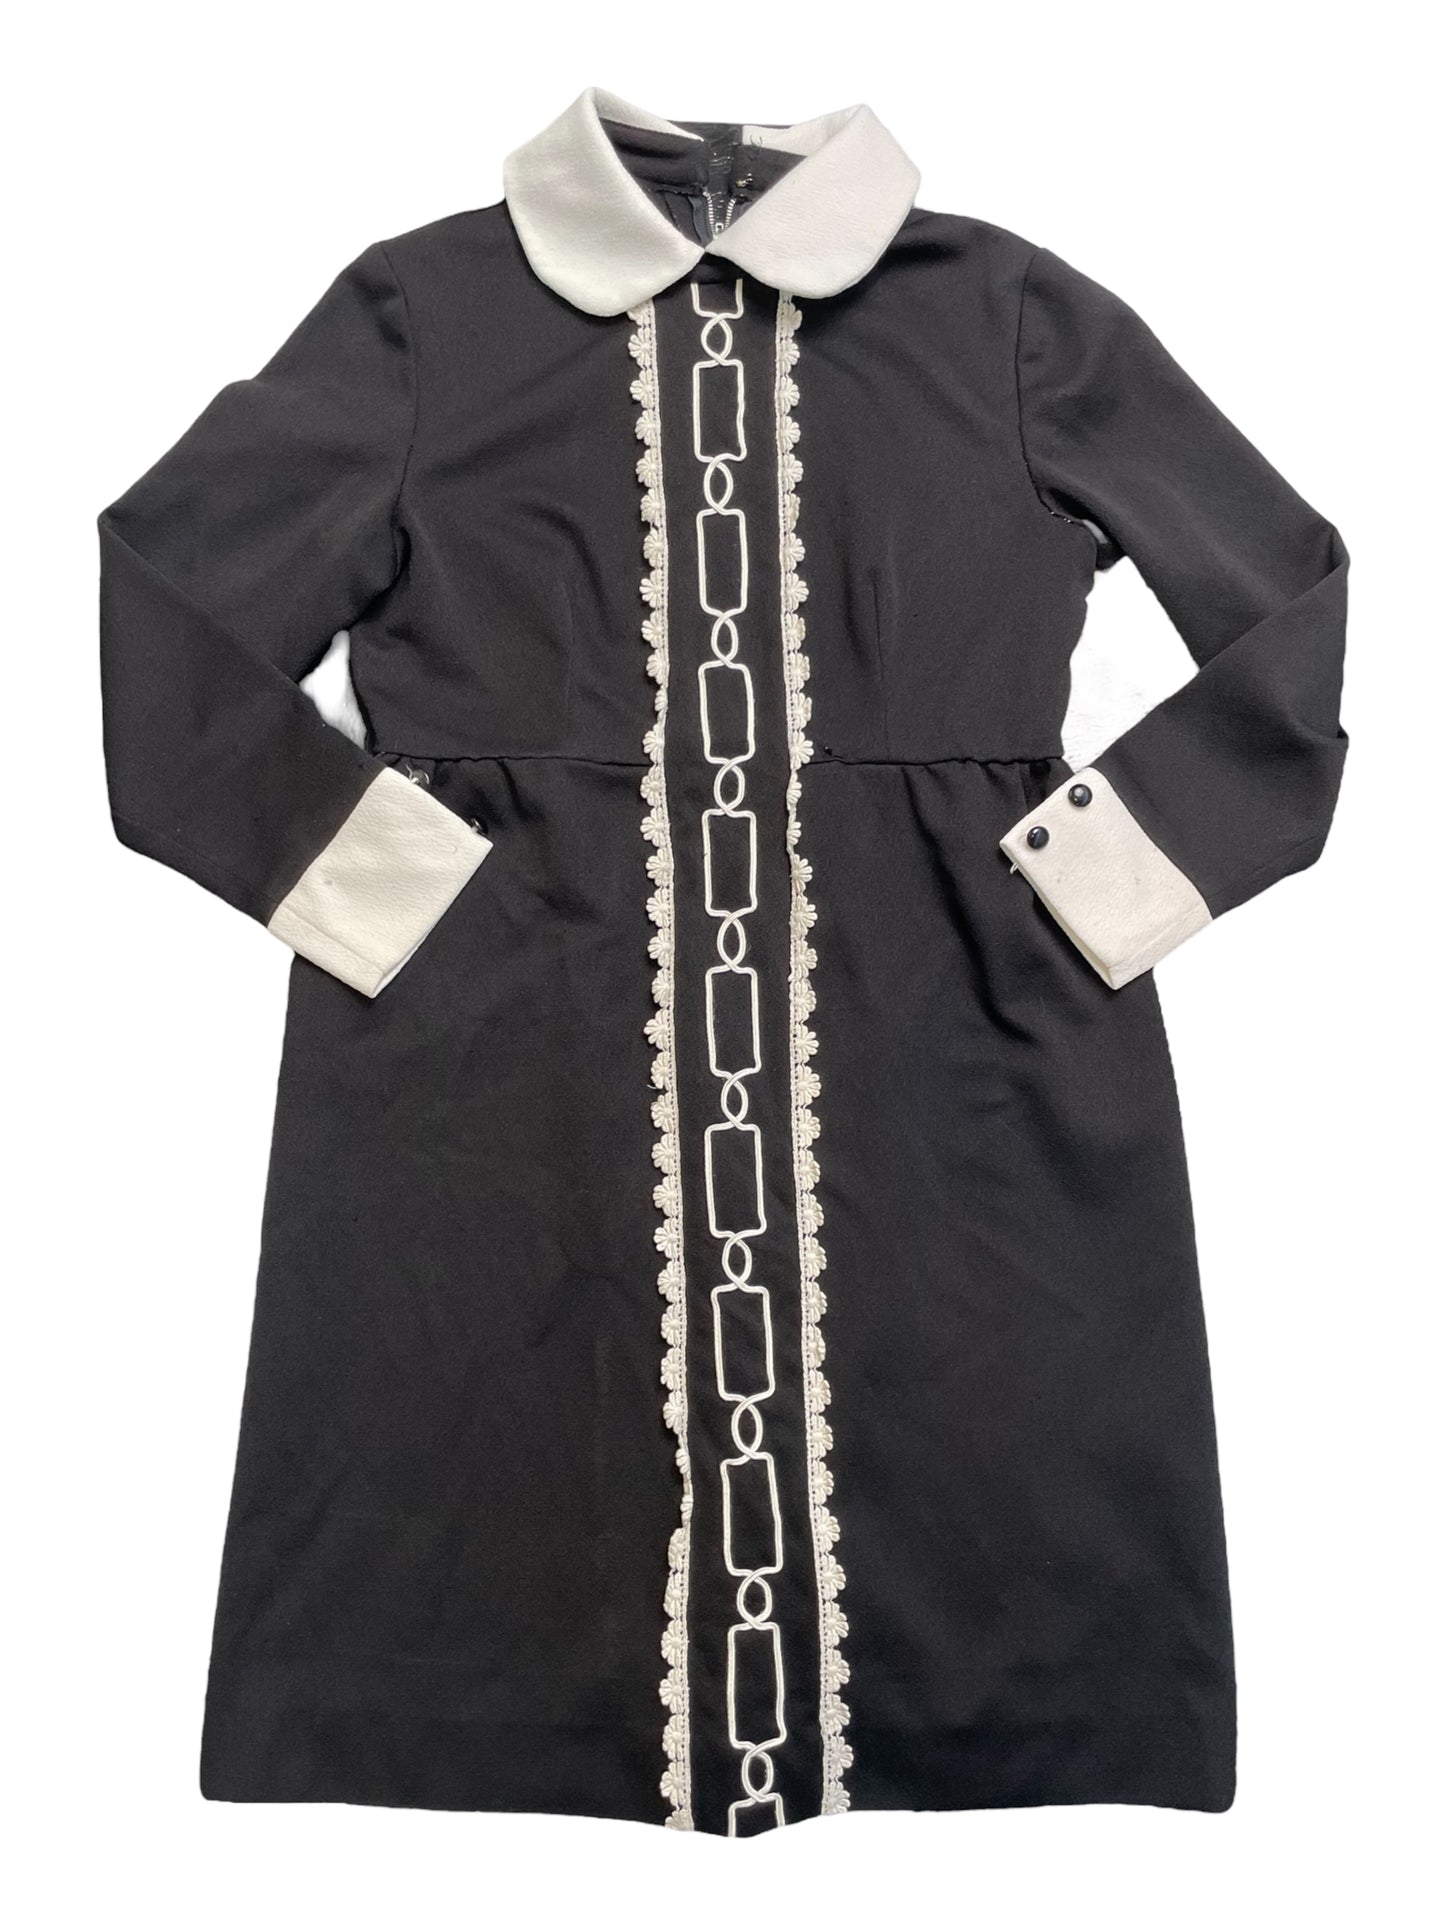 Vintage 60s Black and White Collared Long Sleeve Dress